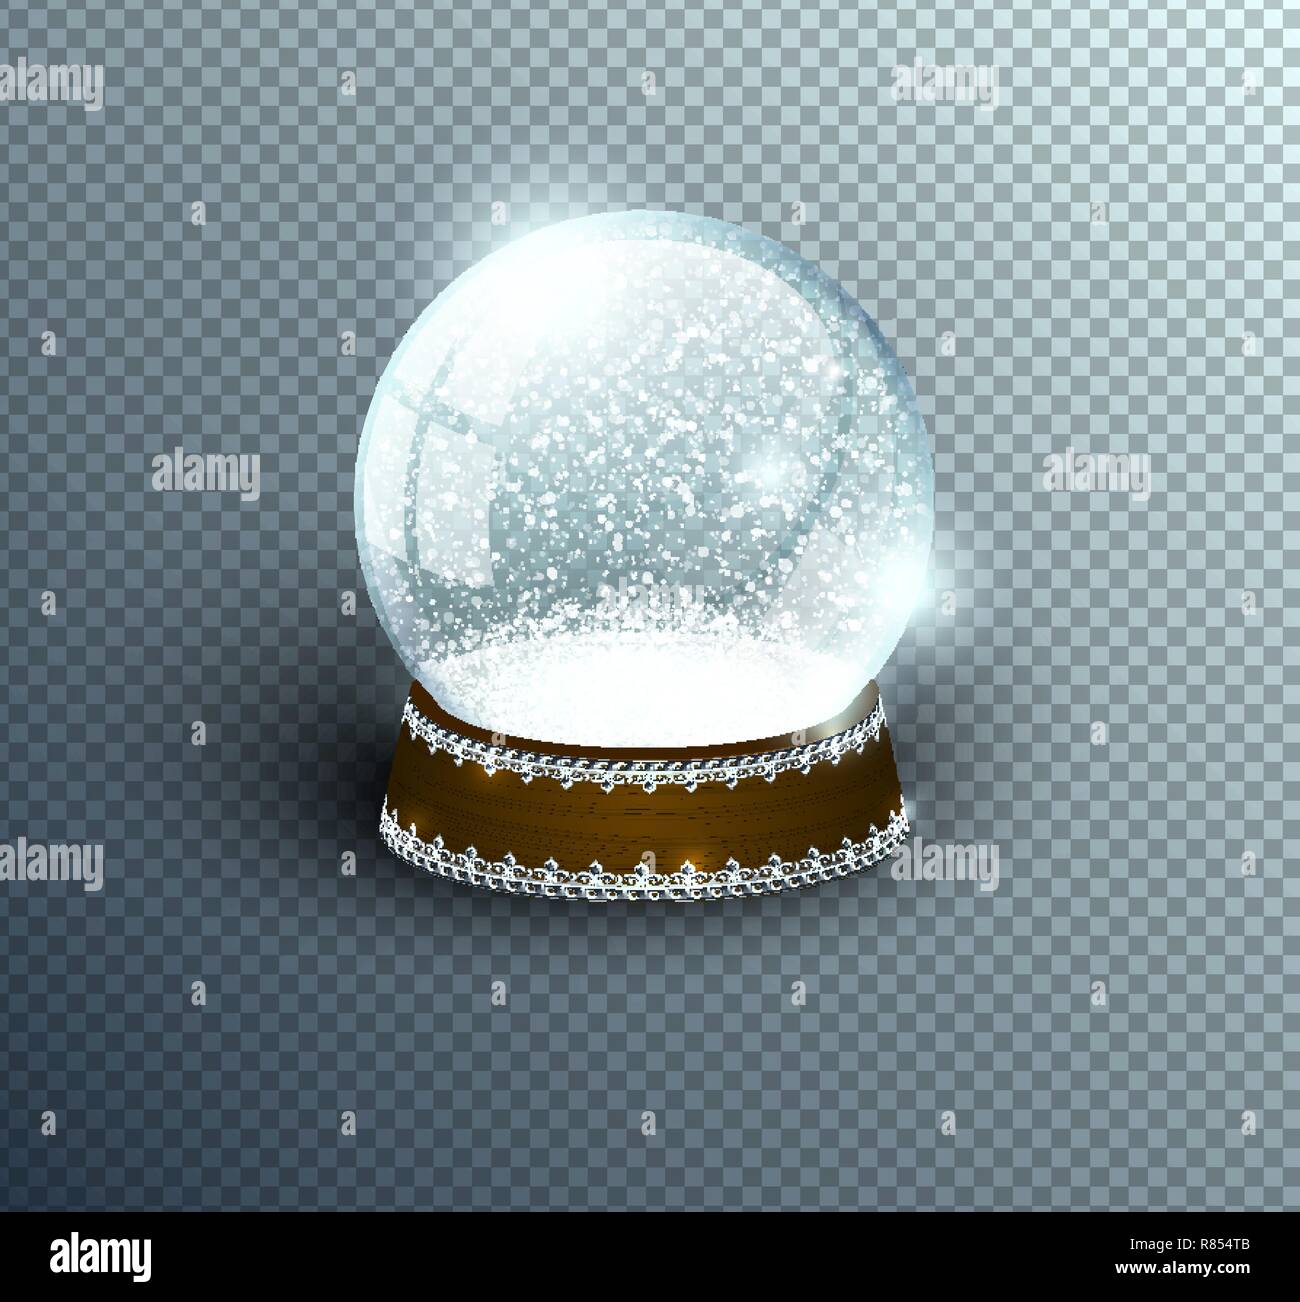 Vector snow globe empty template isolated on transparent background. Christmas magic ball. Glass ball dome, wooden stand with silver crown decor Stock Vector